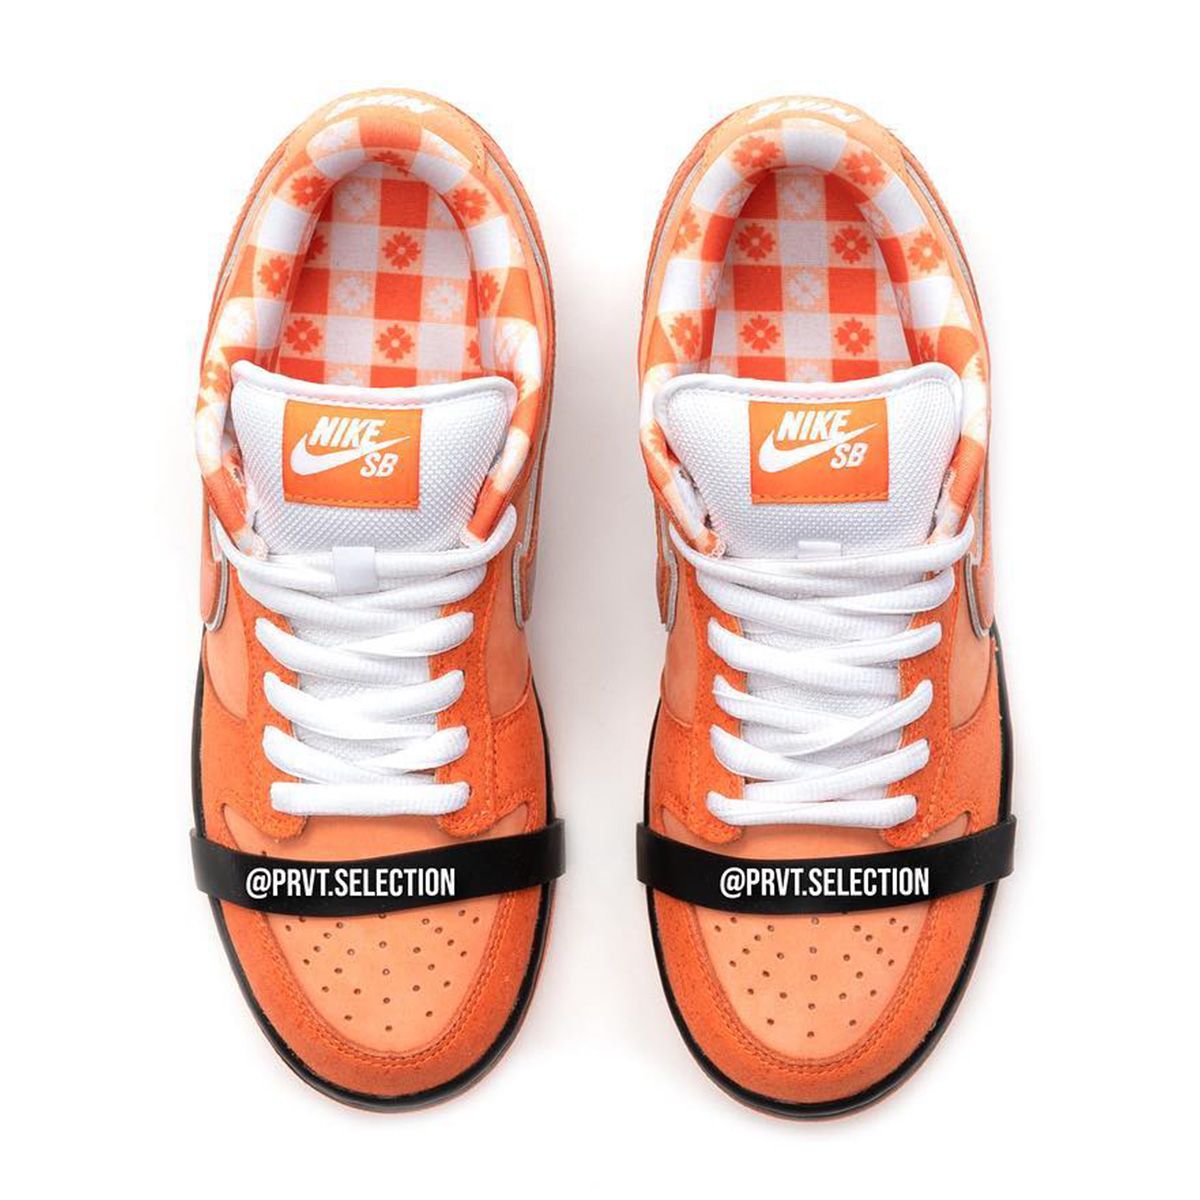 Where to Buy the Concepts x Nike SB Dunk Low “Orange Lobster